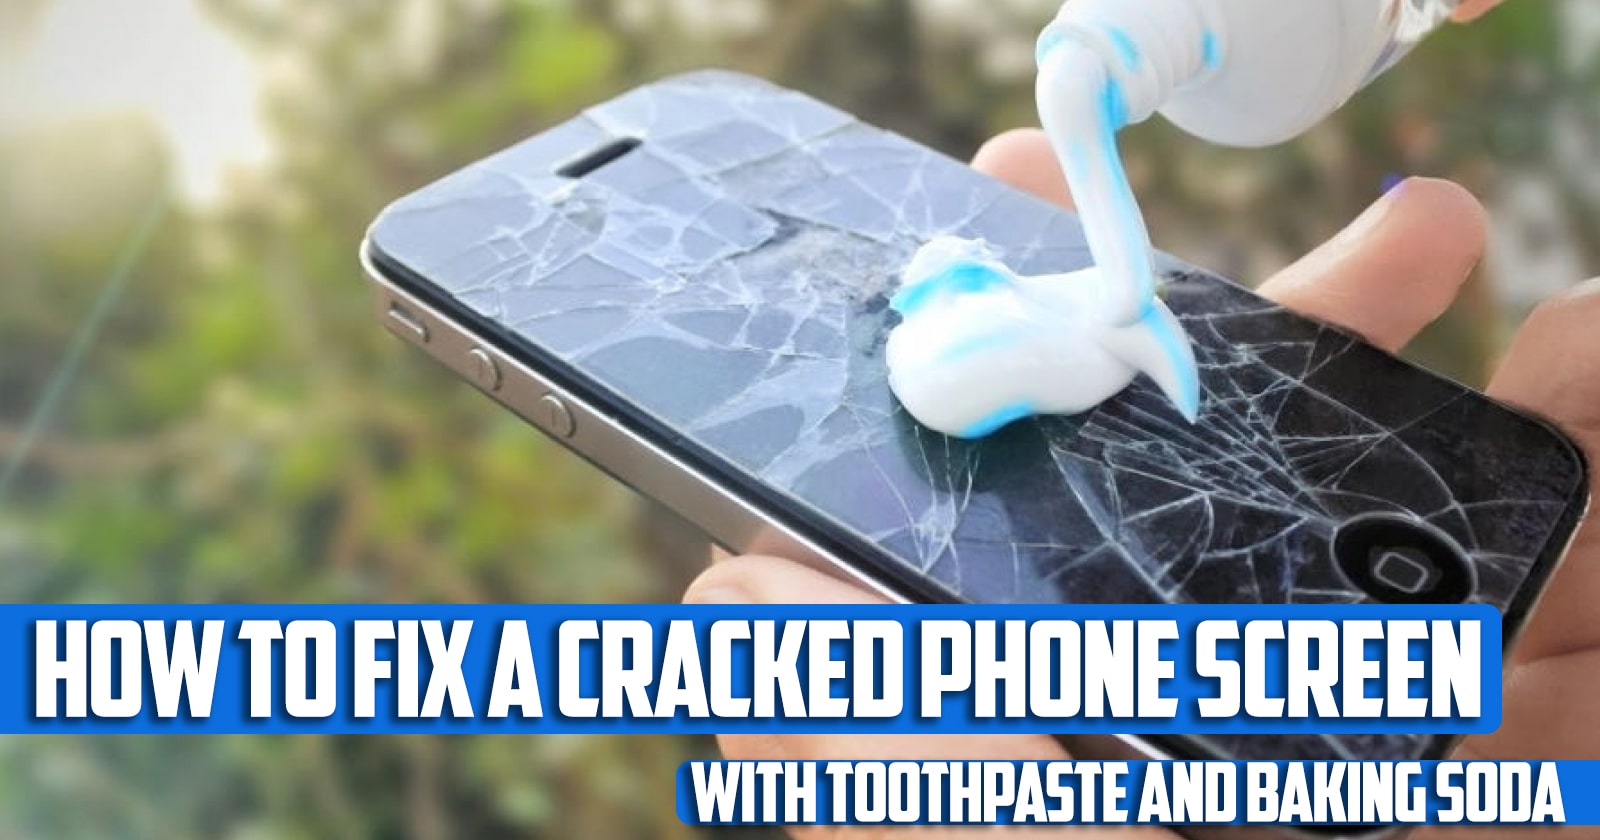 How to Fix a Cracked Phone Screen with Toothpaste and Baking Soda